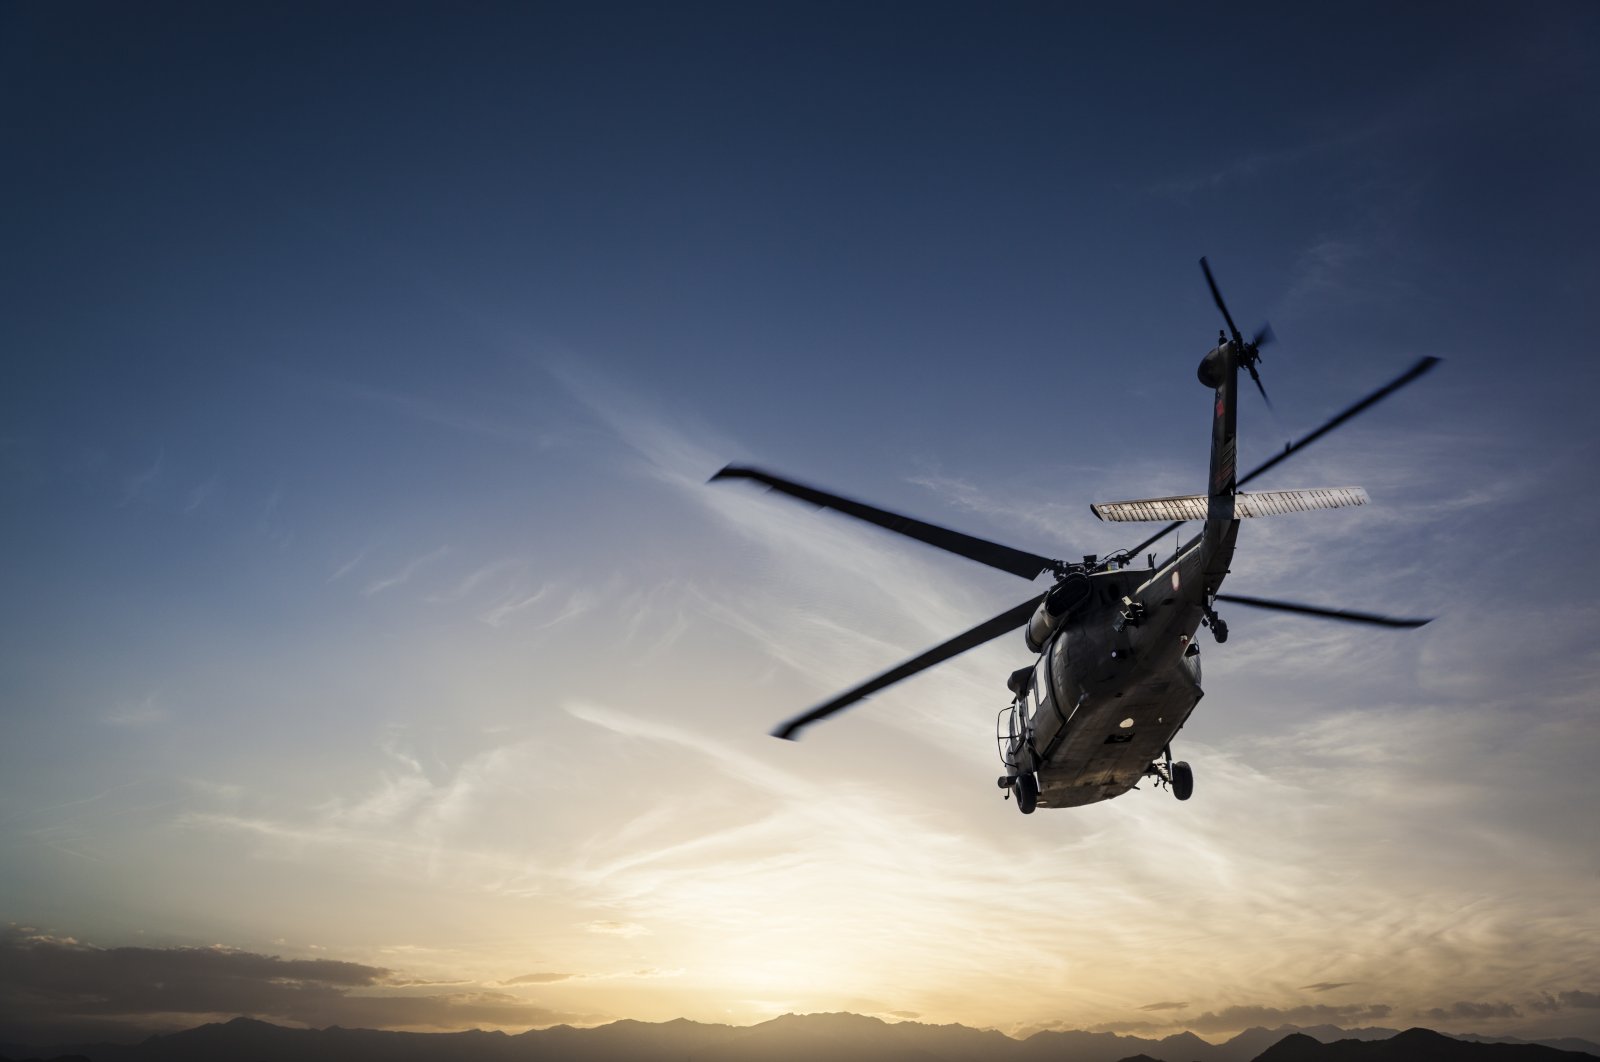 2 US Army choppers crash in Alaska, killing 3 soldiers